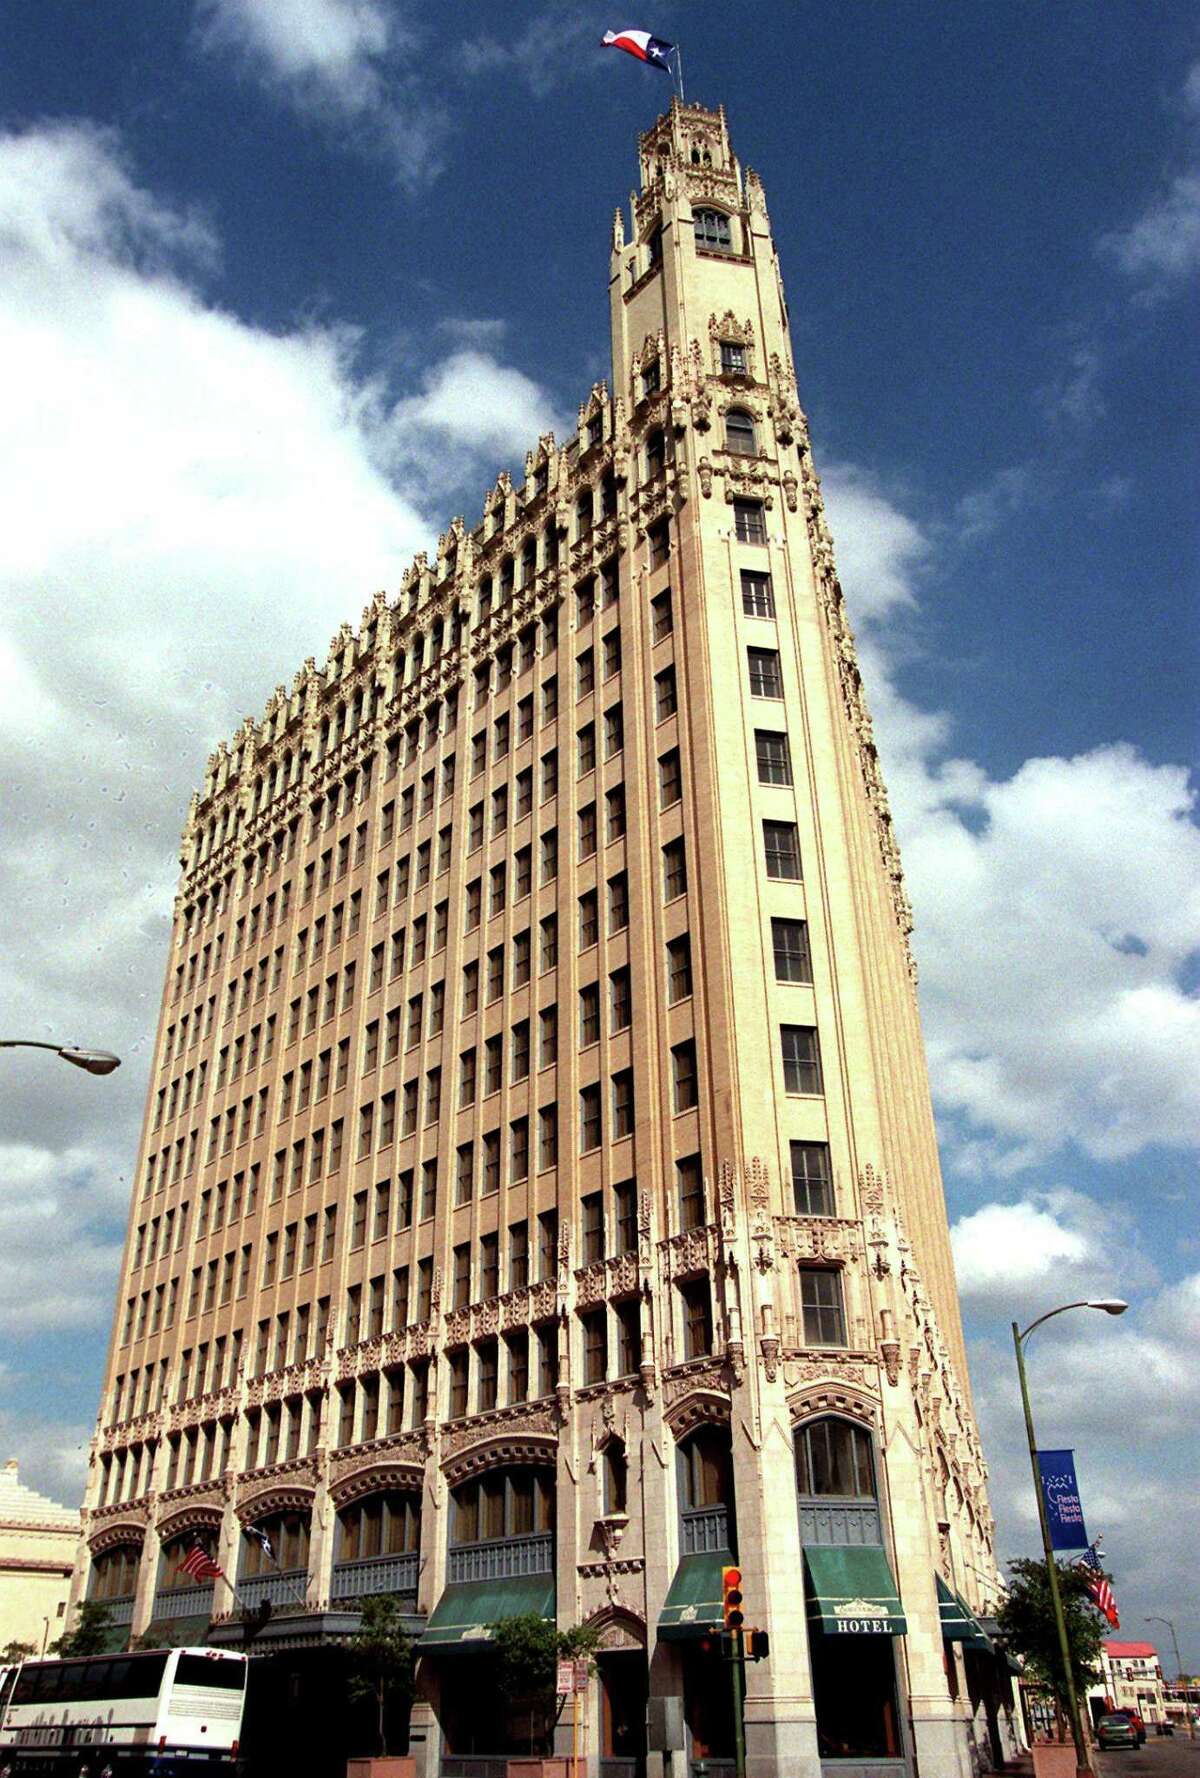 This photo of the Emily Morgan Hotel was taken in April 1998. When it first opened in 1928, it was known as the Medical Arts Building and, at 13 stories, was considered the first skyscraper west of the Mississippi. It was renamed the Emily Morgan Hotel in honor of the legendary “Yellow Rose of Texas” when it reopened in 1984.